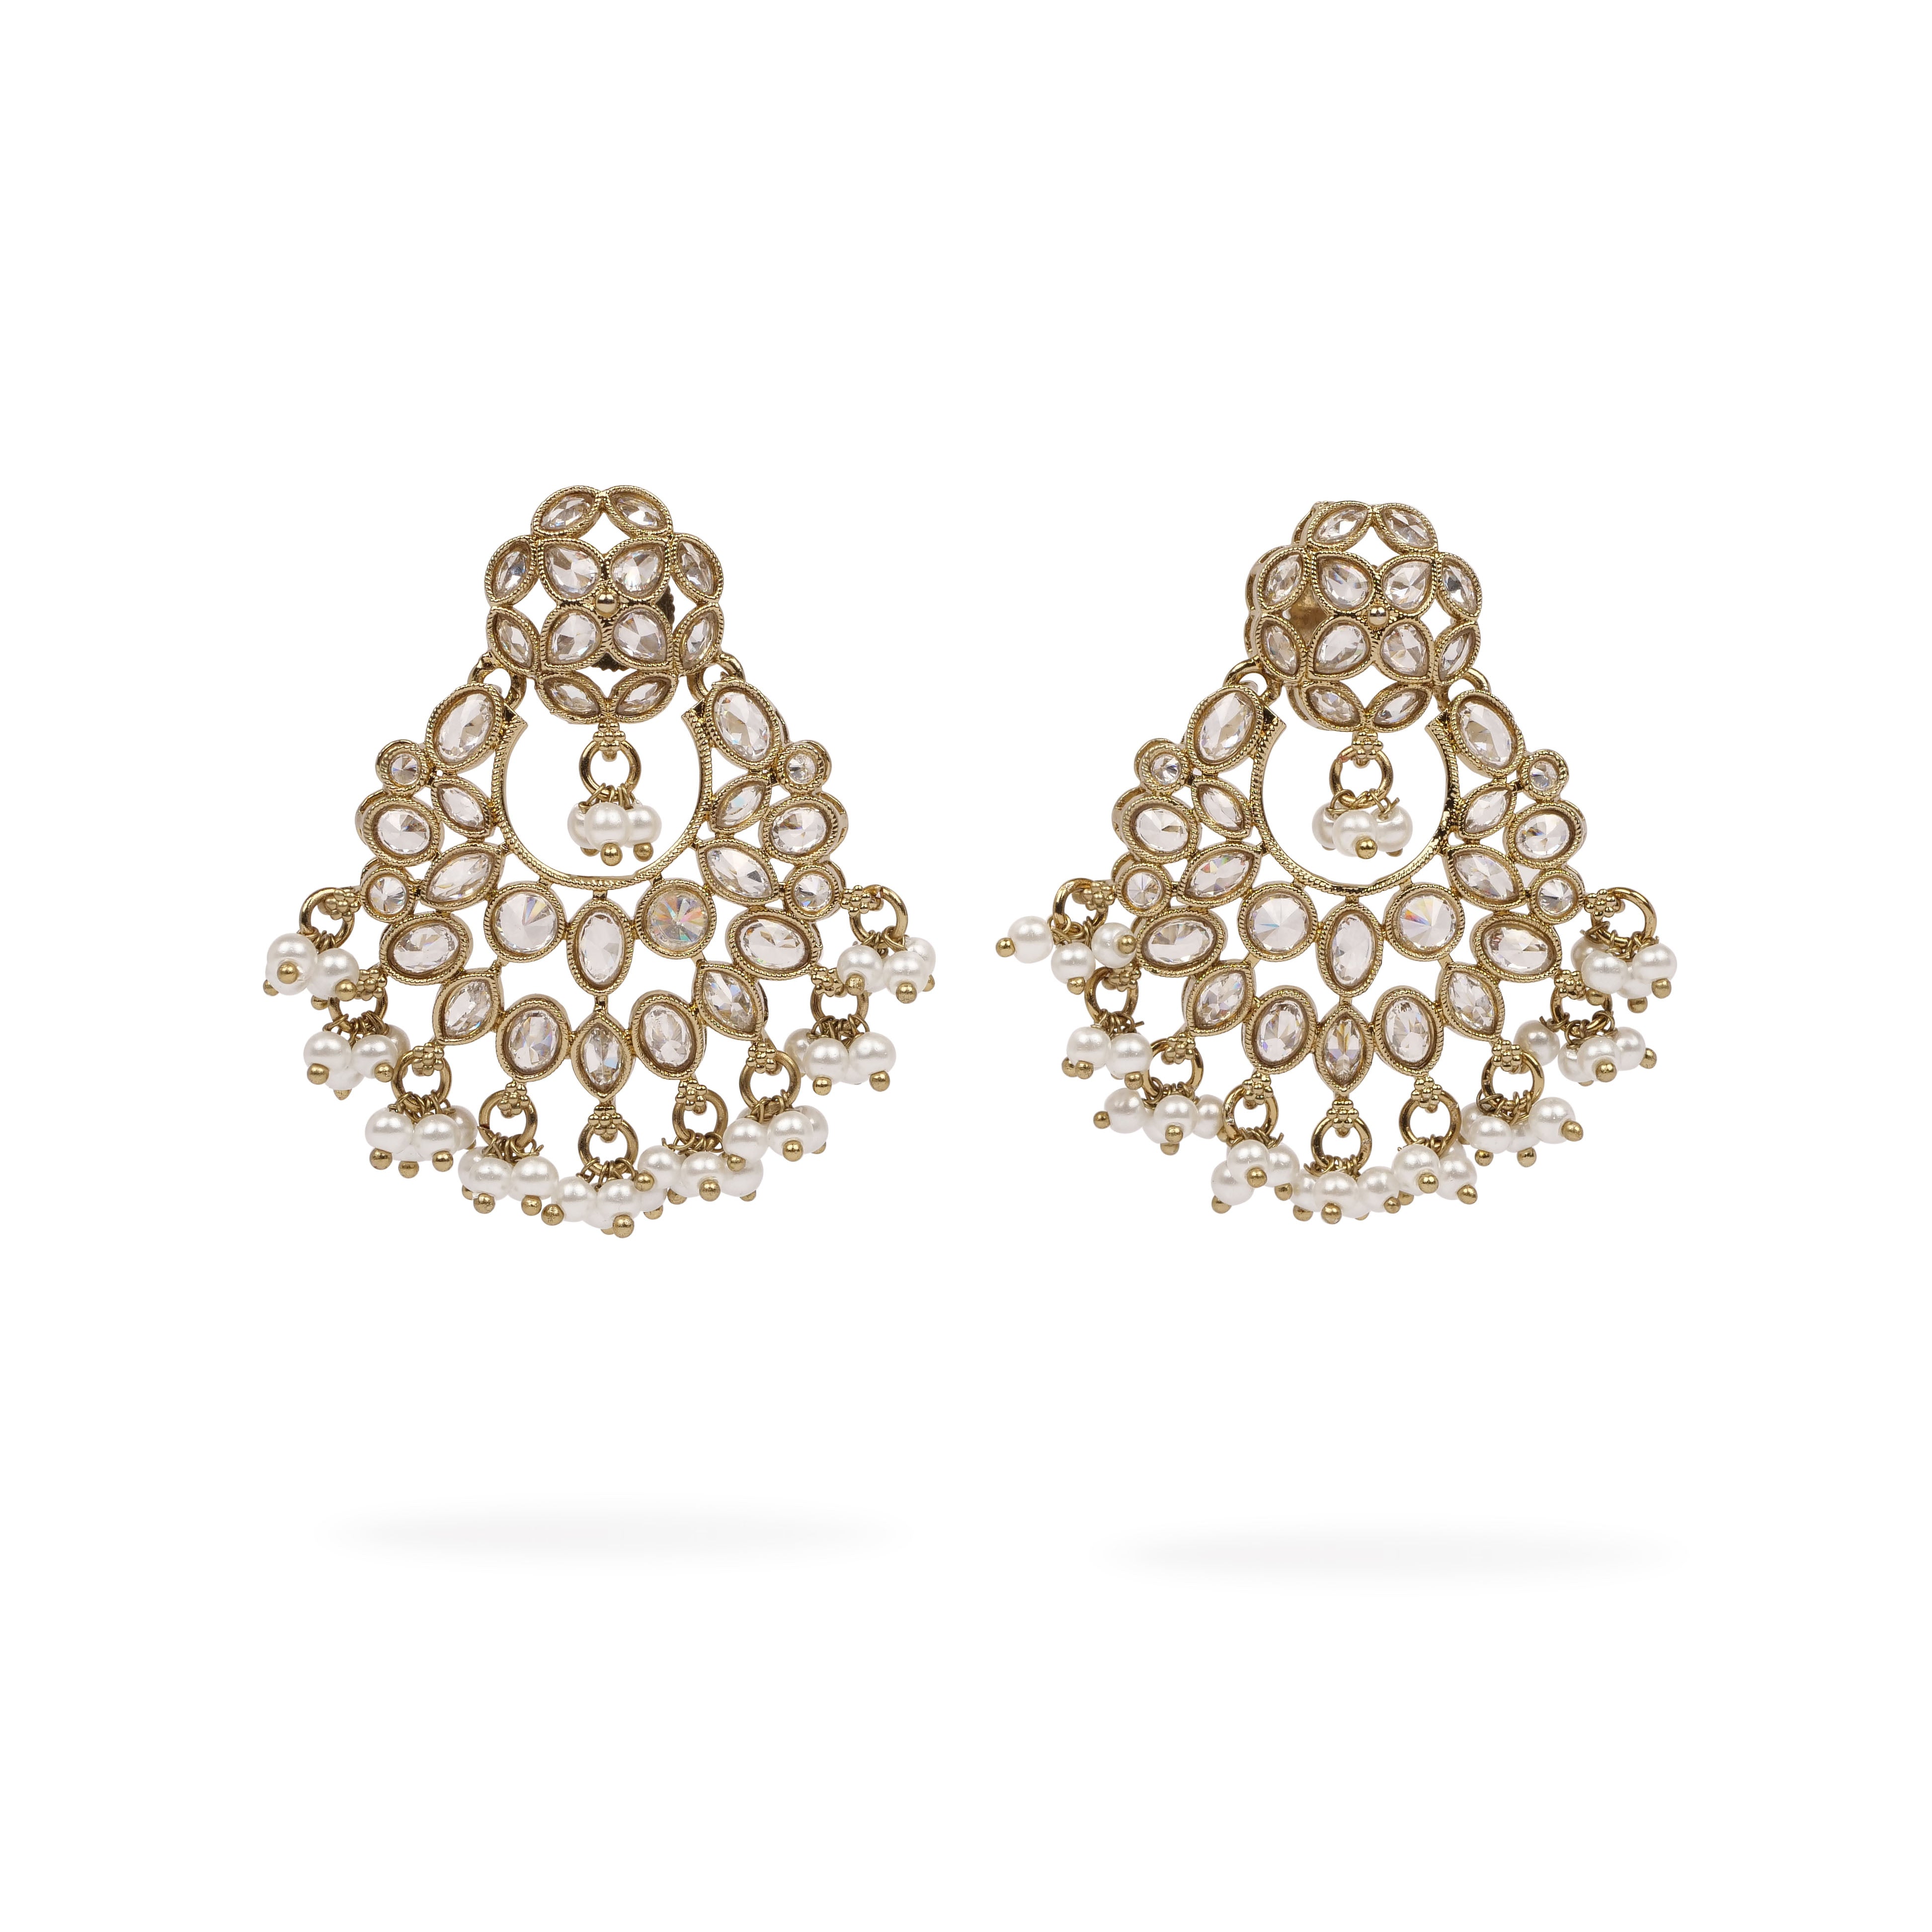 Small Ethnic Crystal Earrings in White